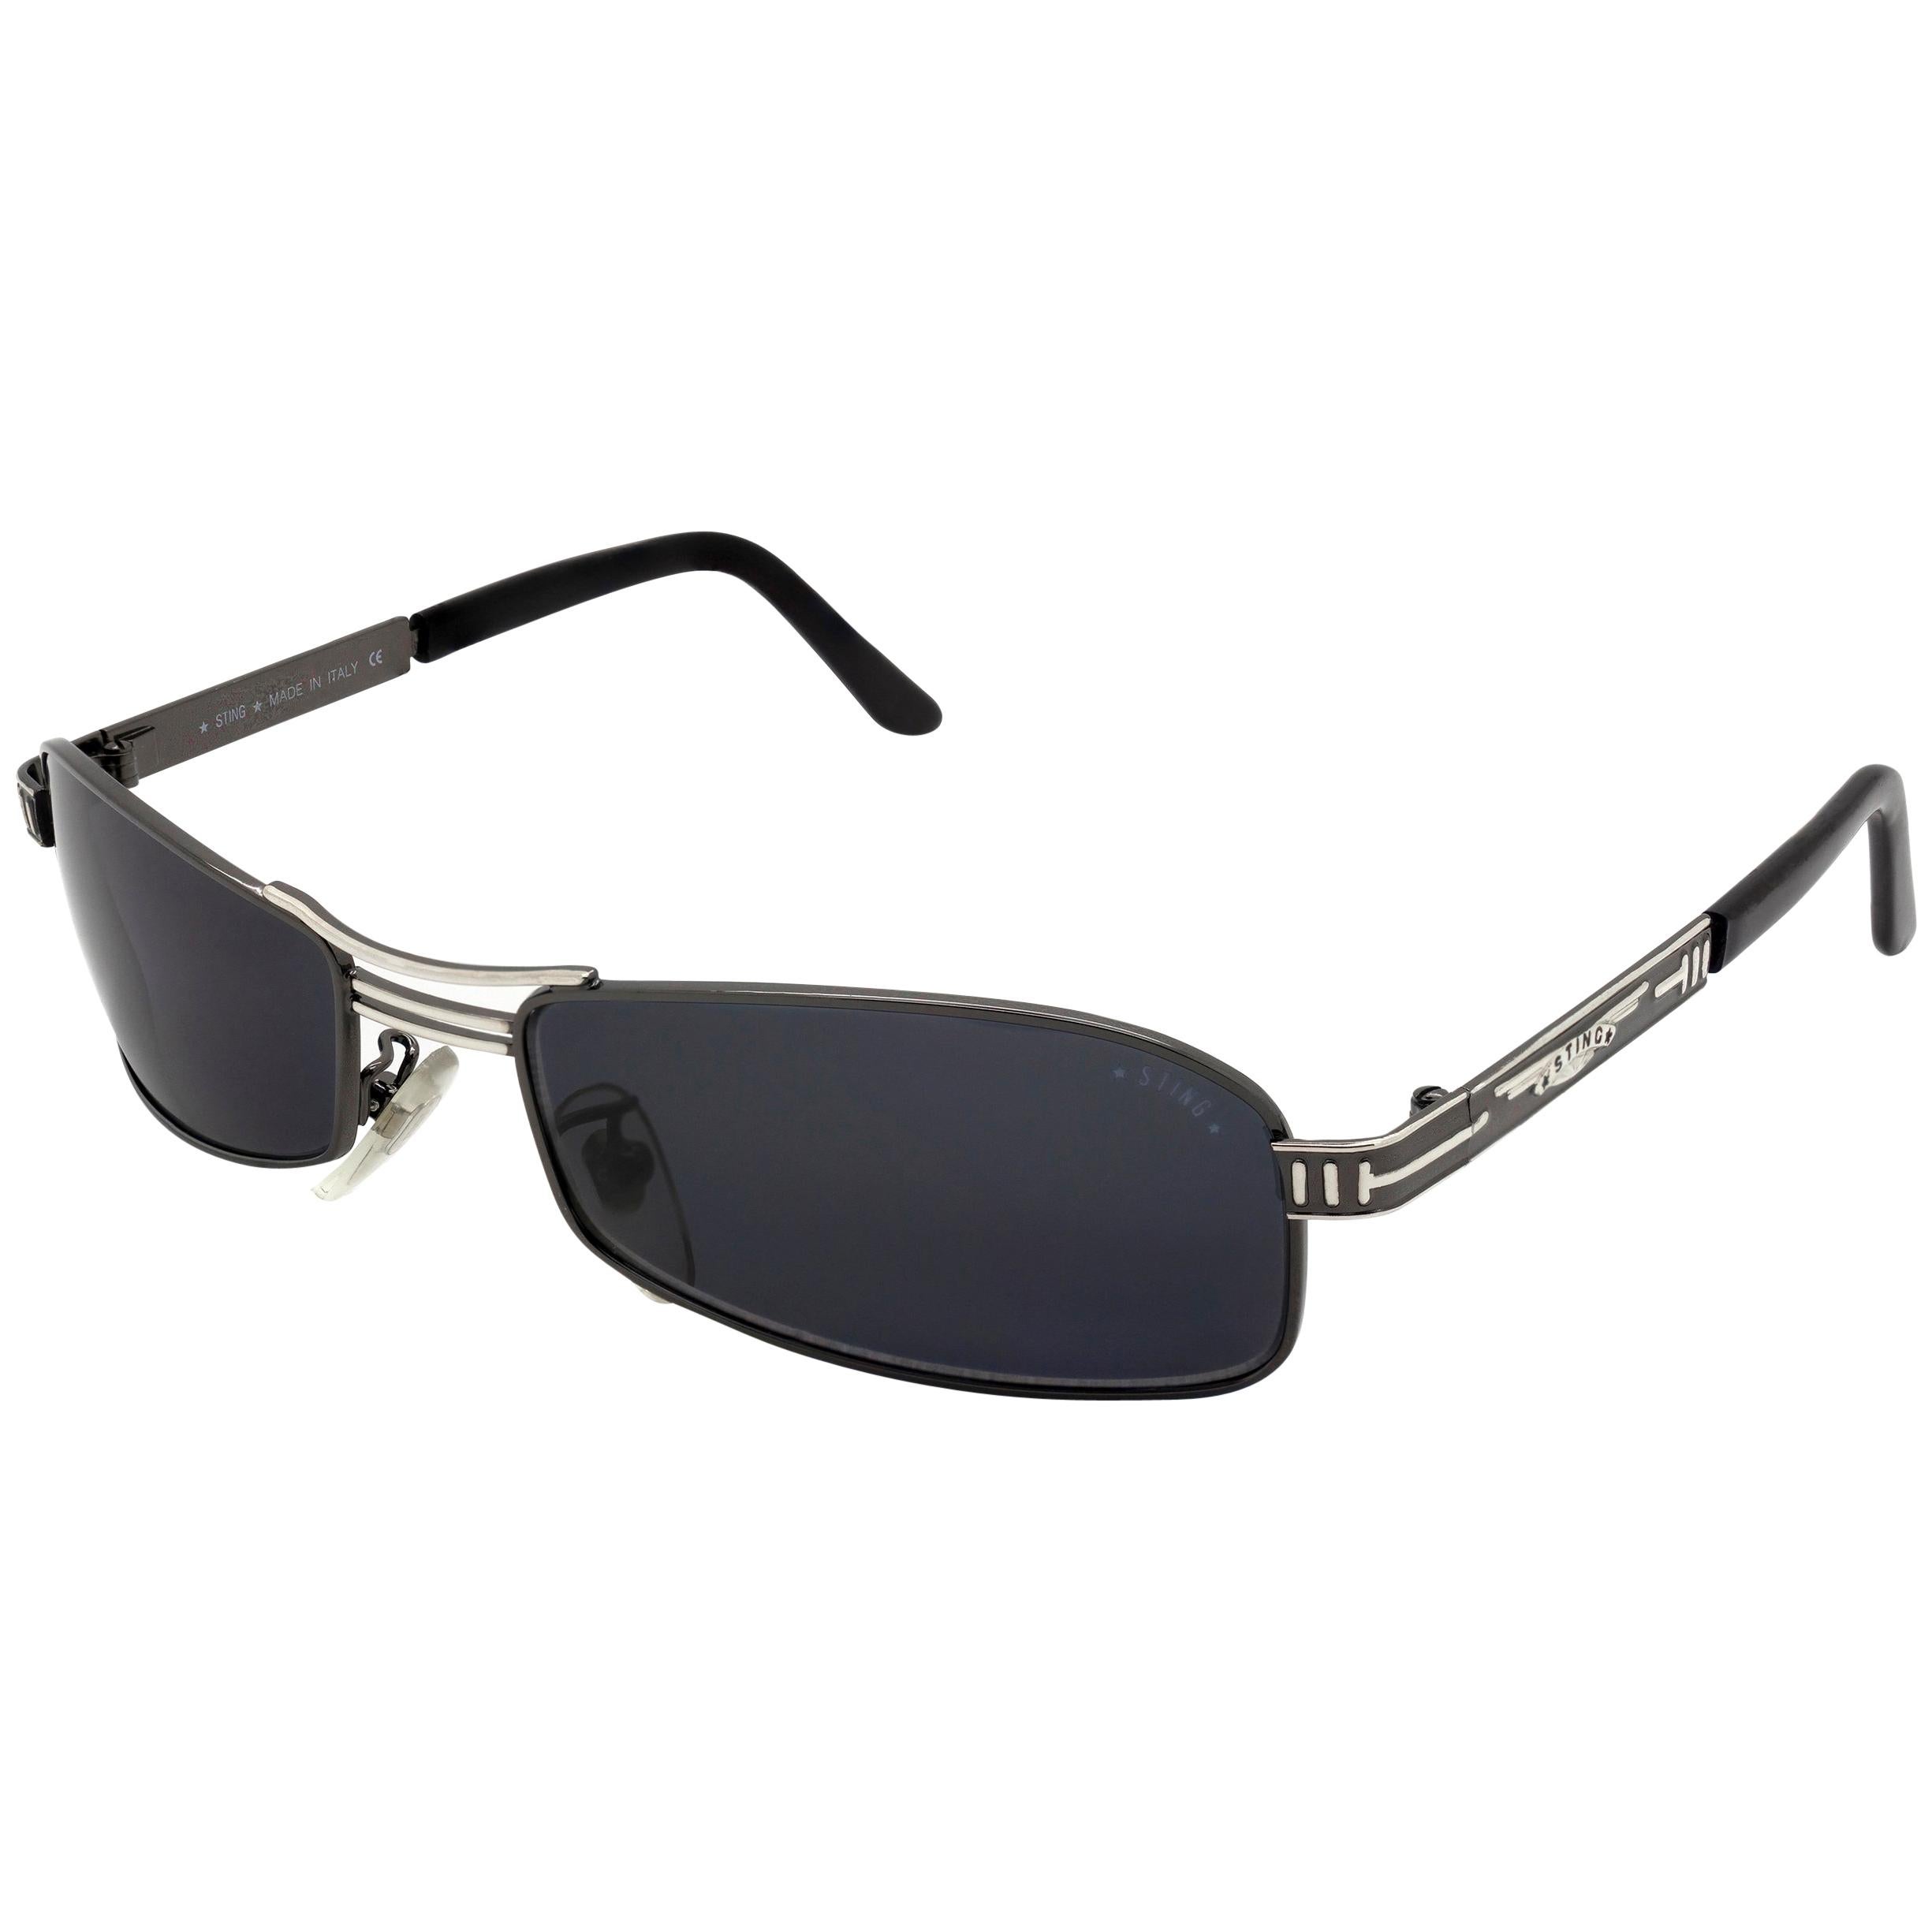 Aviator sunglasses by Sting, made in Italy